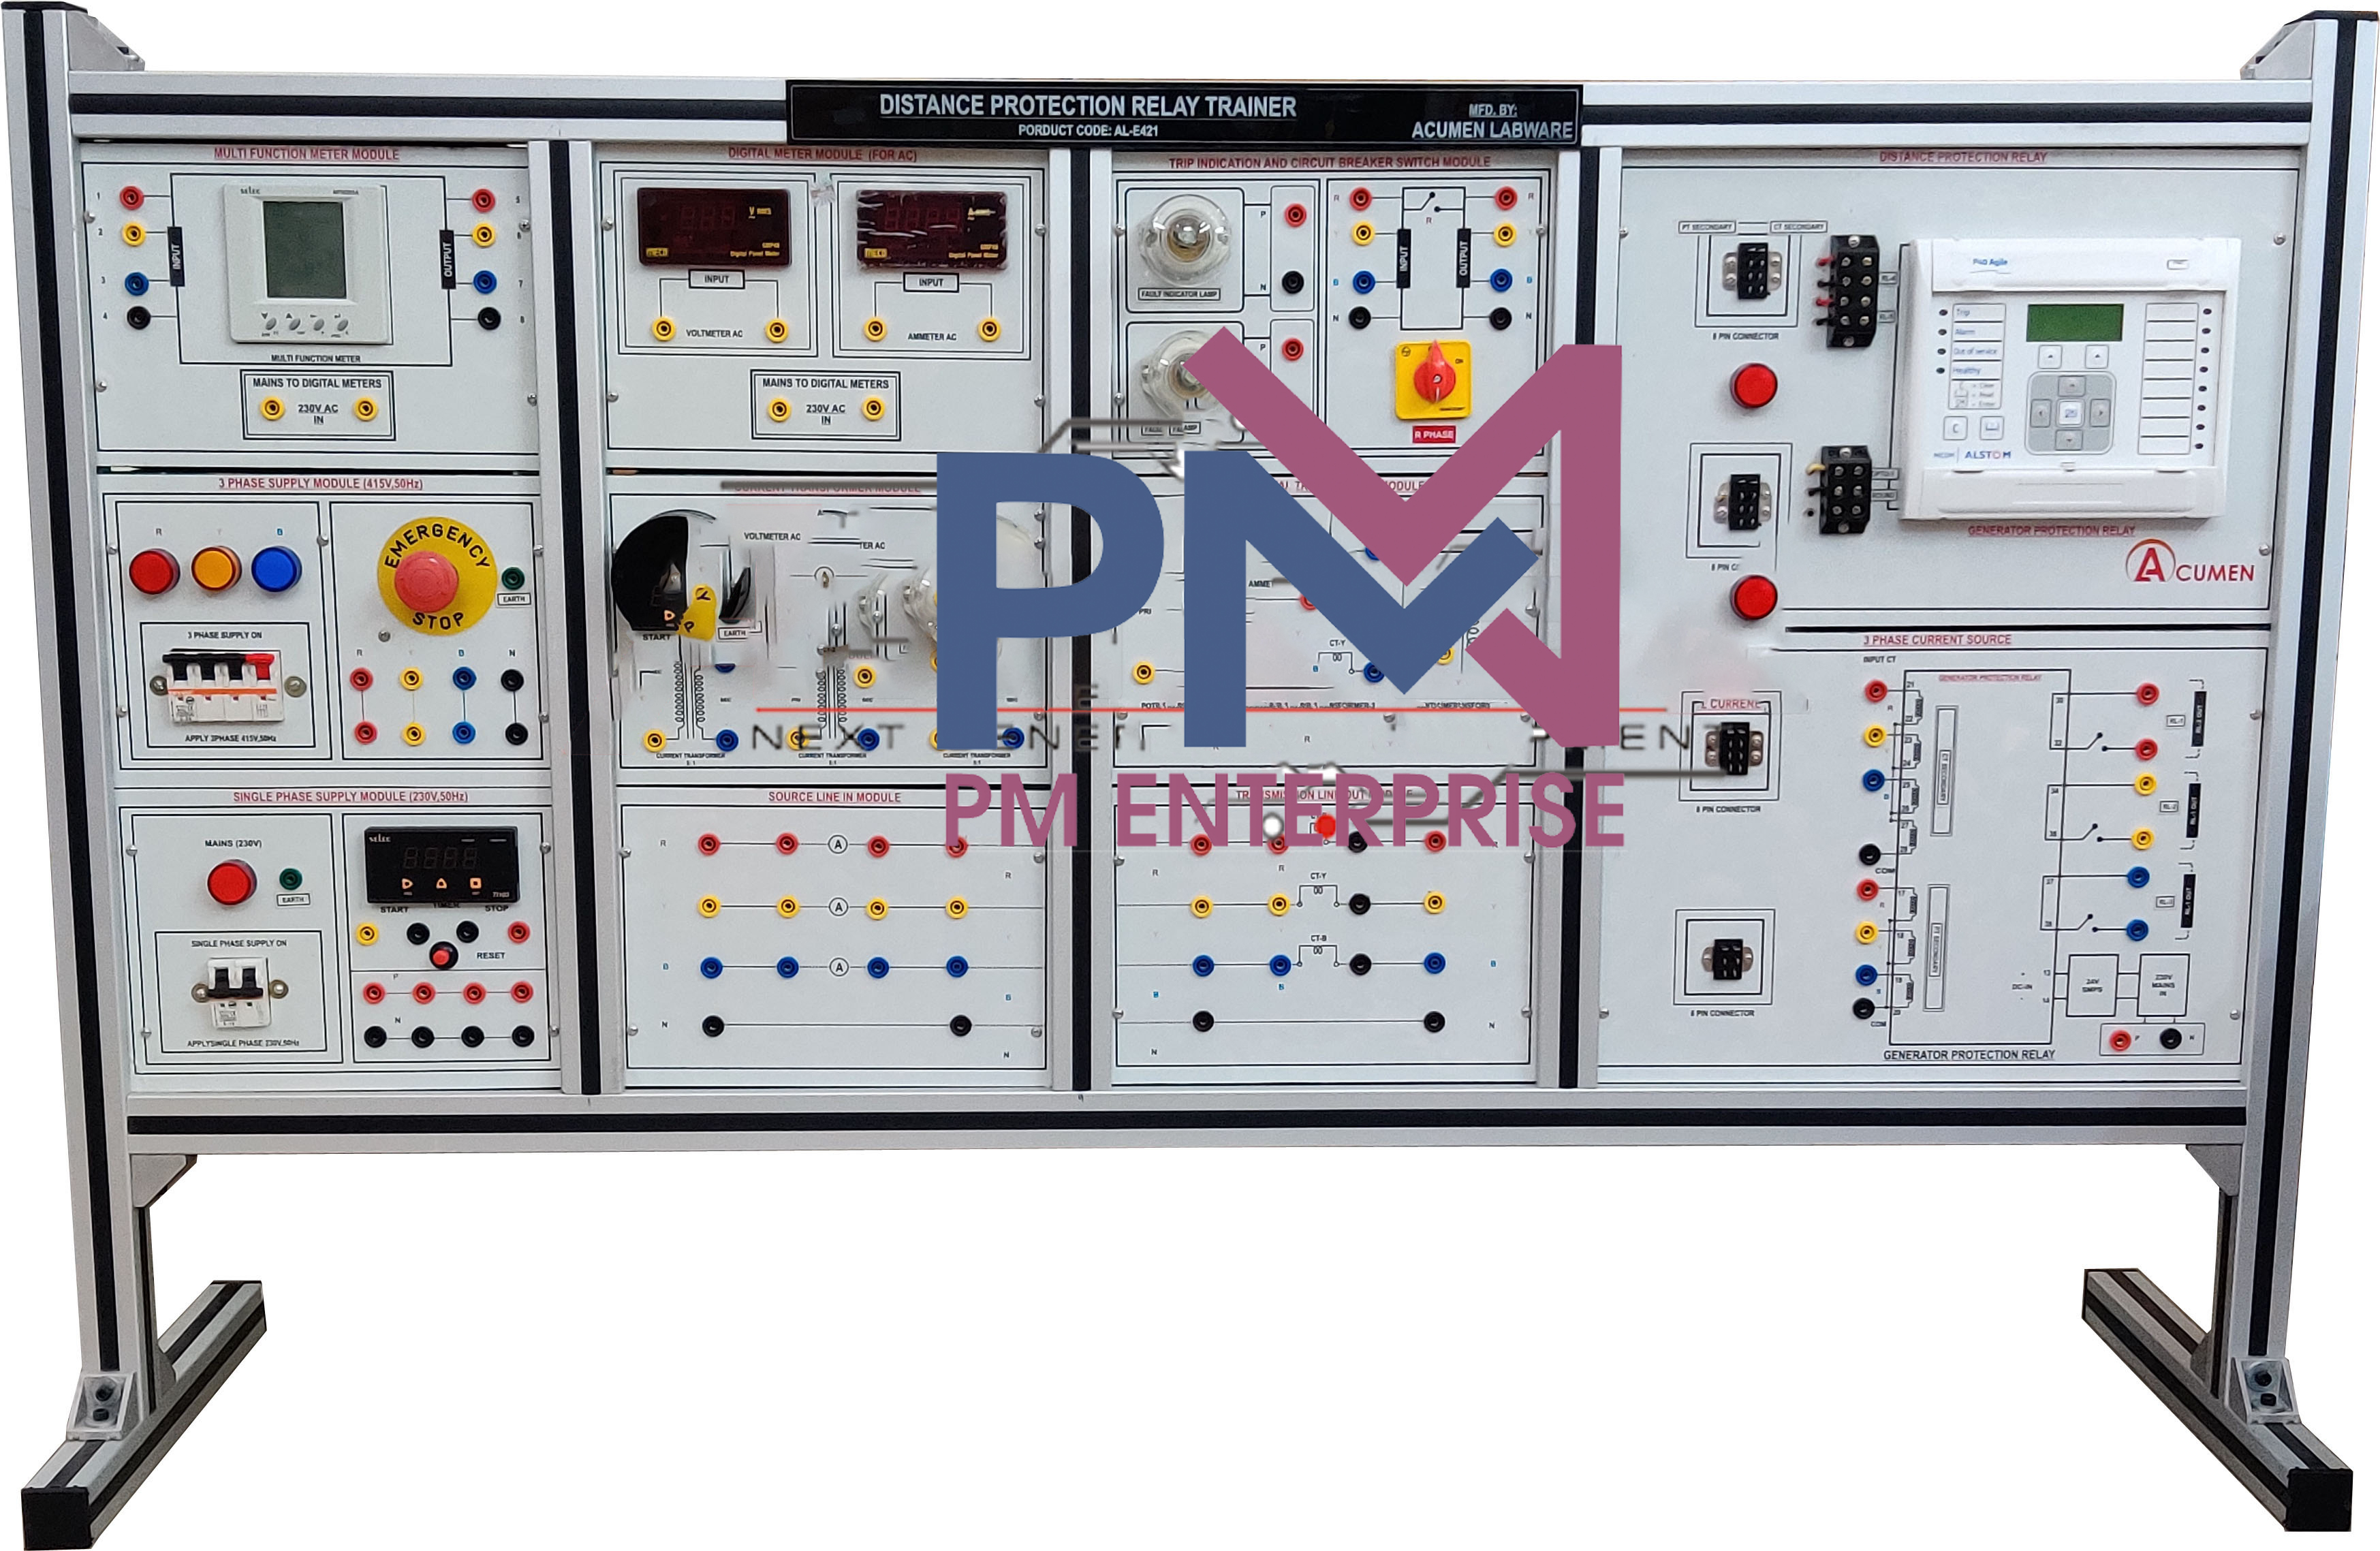 PM-P833 DISTANCE PROTECTION RELAY TRAINING SYSTEM